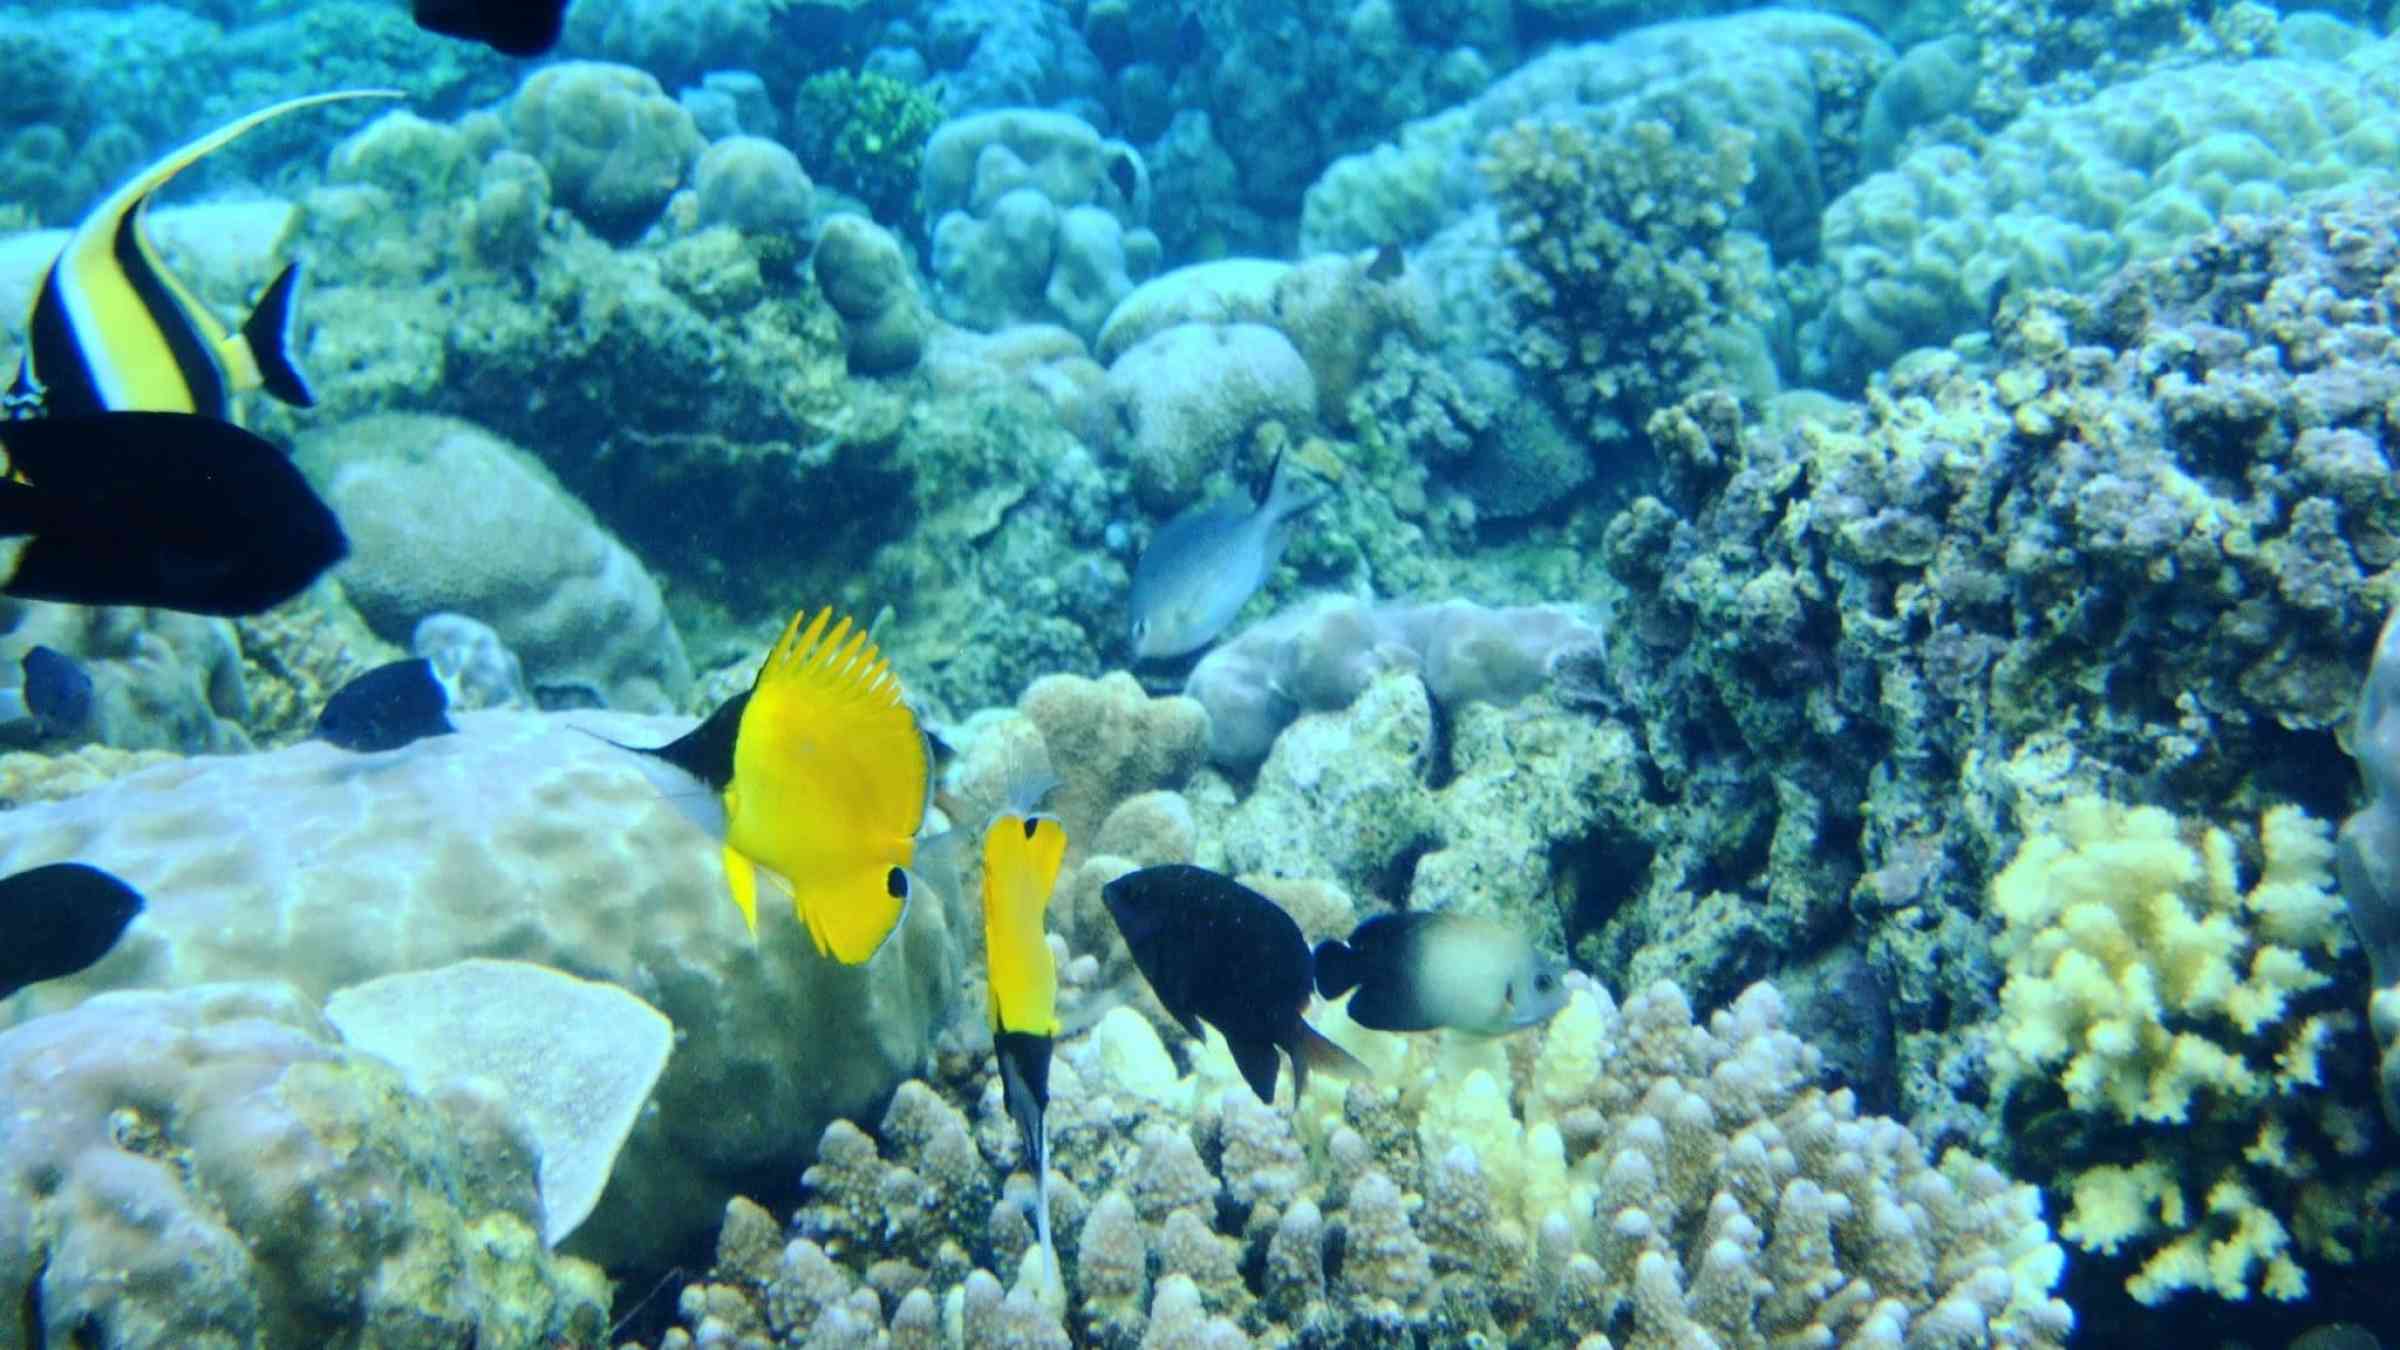 Image of fish and coral